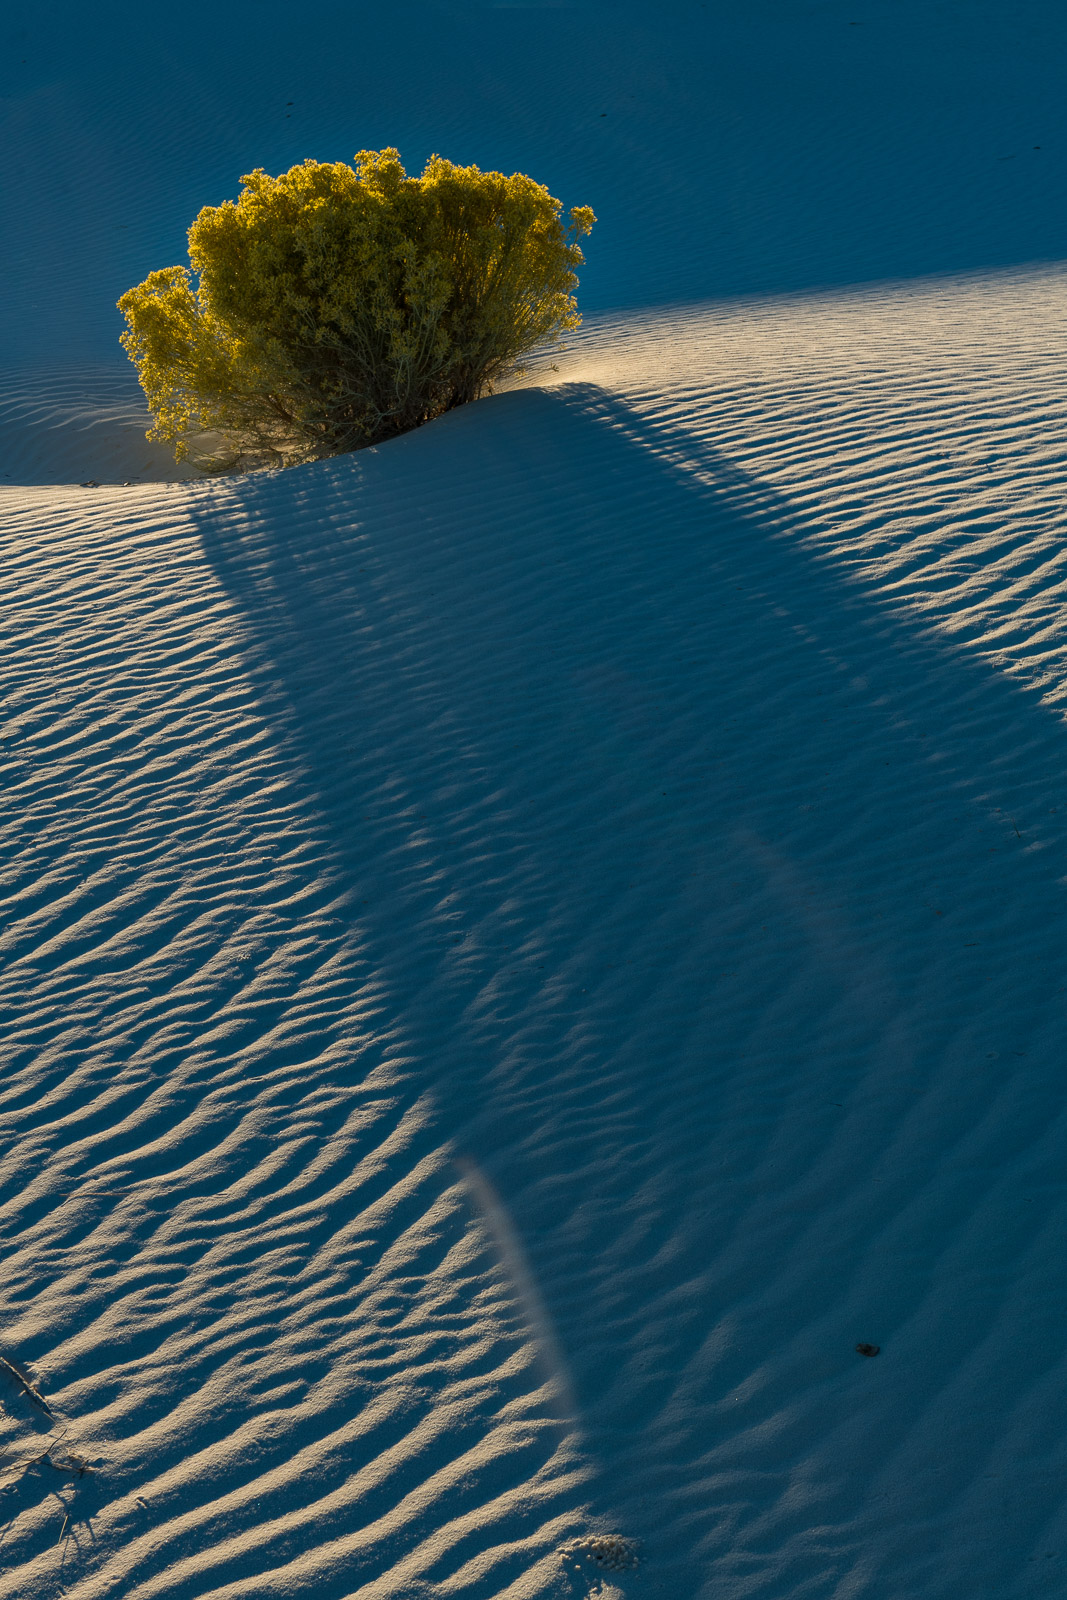 A Rubber Rabbitbrush plant casts a long shadow on the gypsum dunes at White Sands National Park, New Mexico.